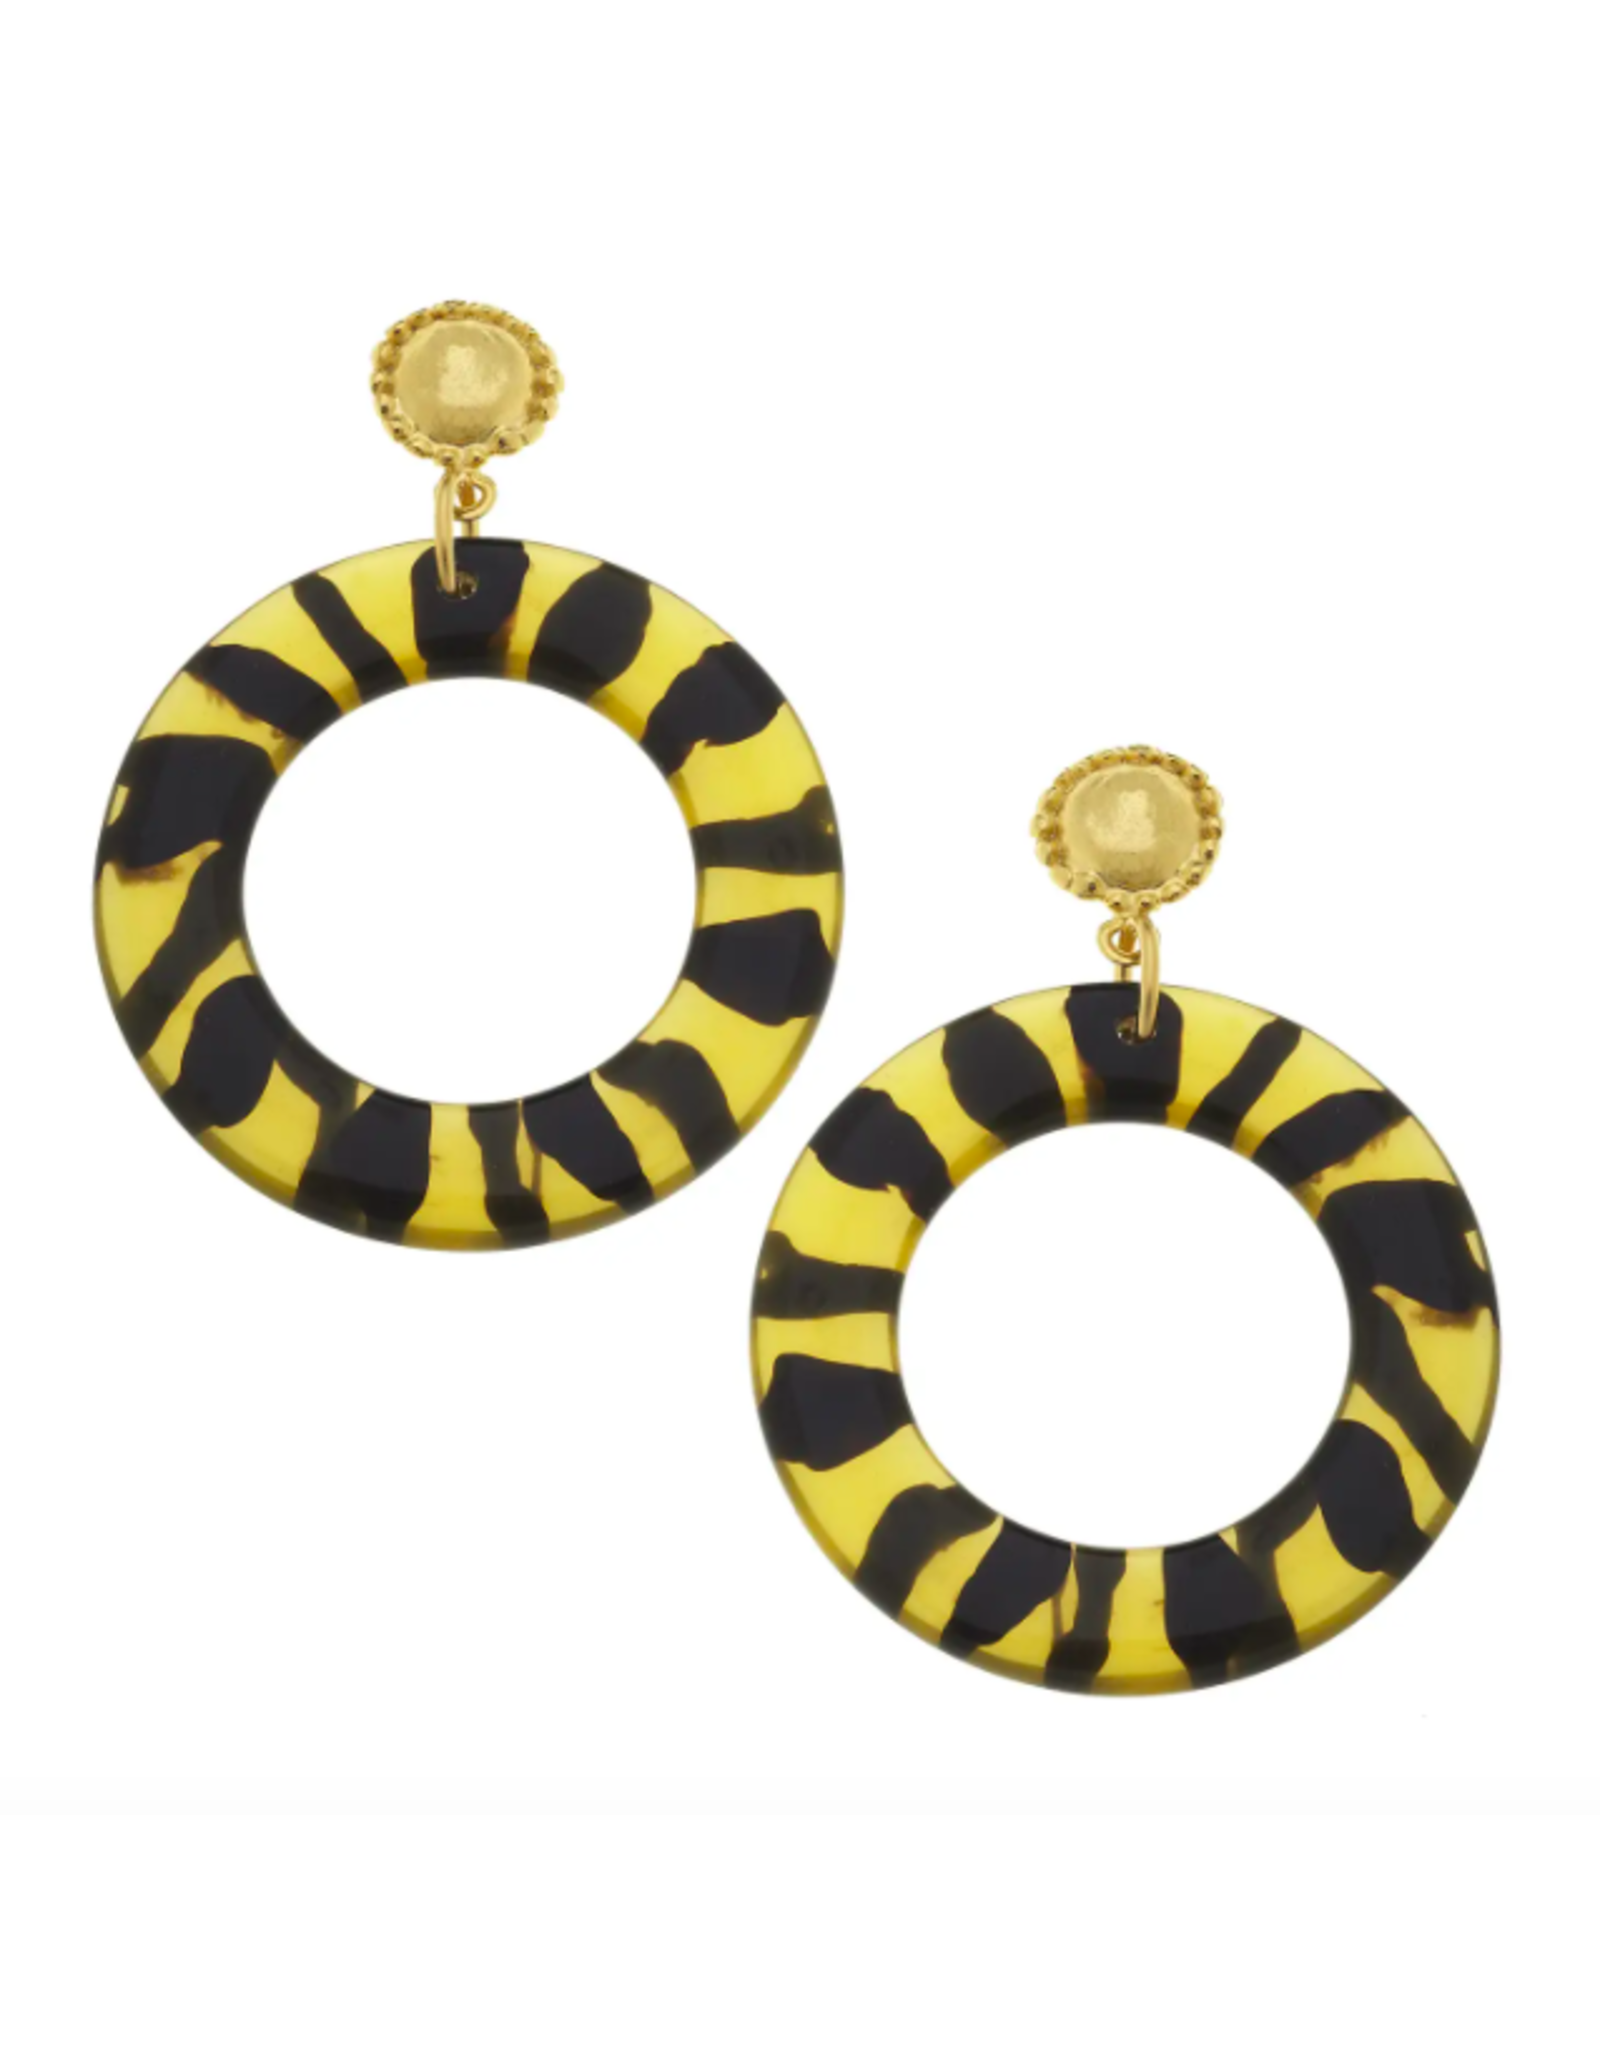 Susan Shaw Gold and Tortoise Drop Earrings by Susan Shaw